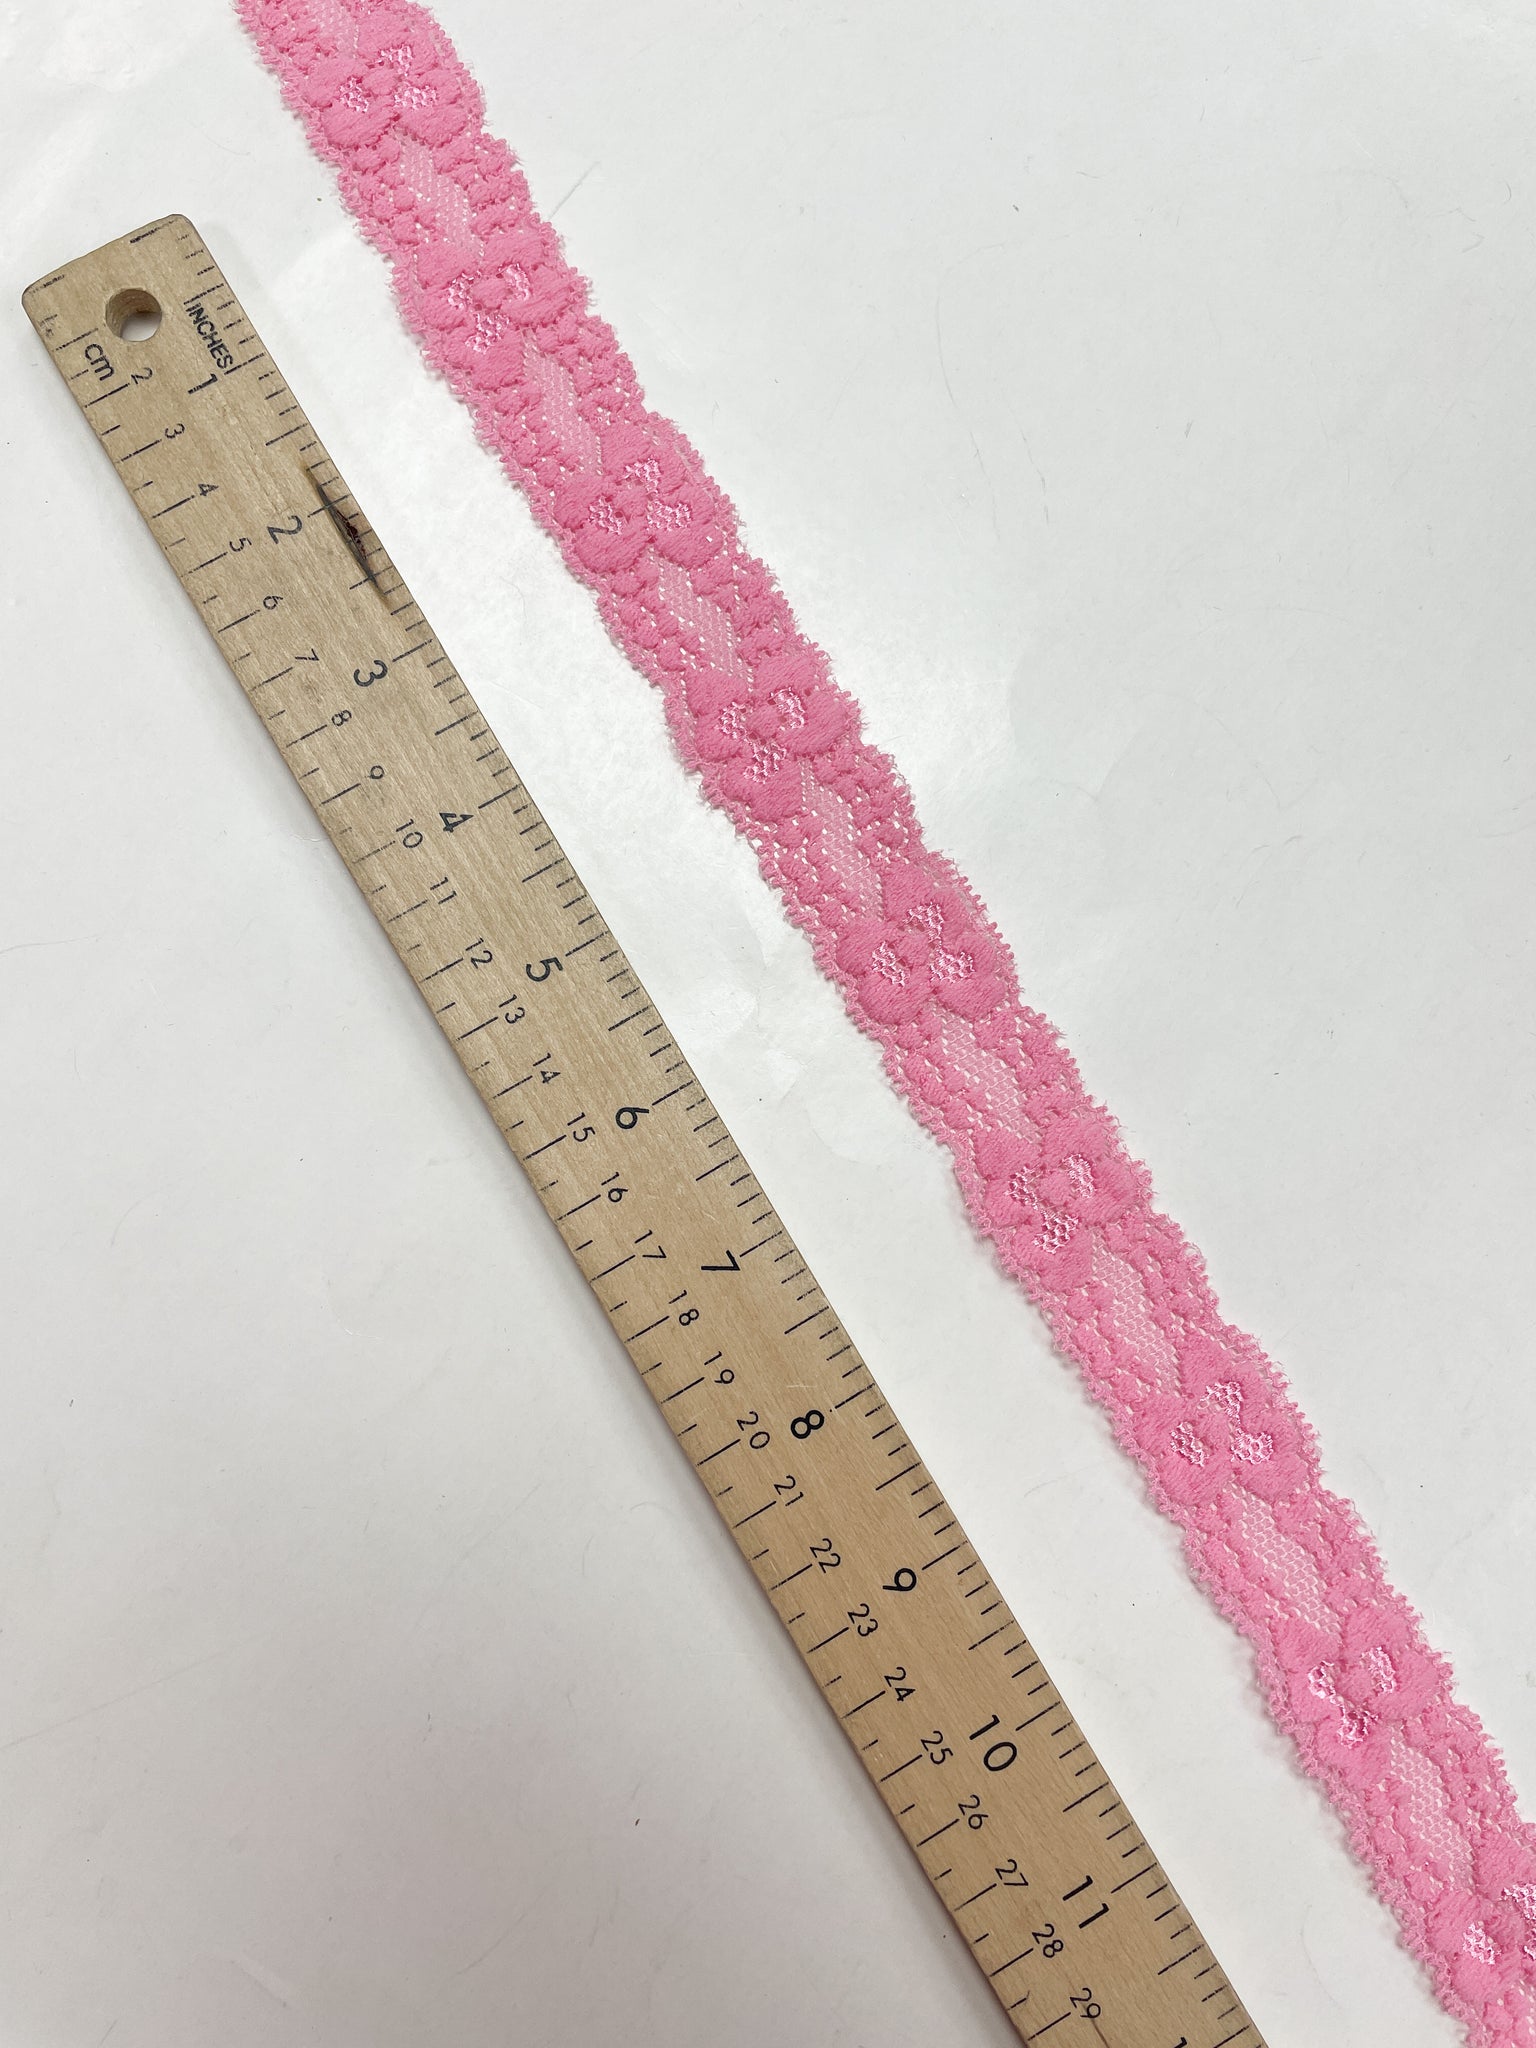 SALE 100 YD Nylon Elastic Floral Lace - Cotton Candy Pink